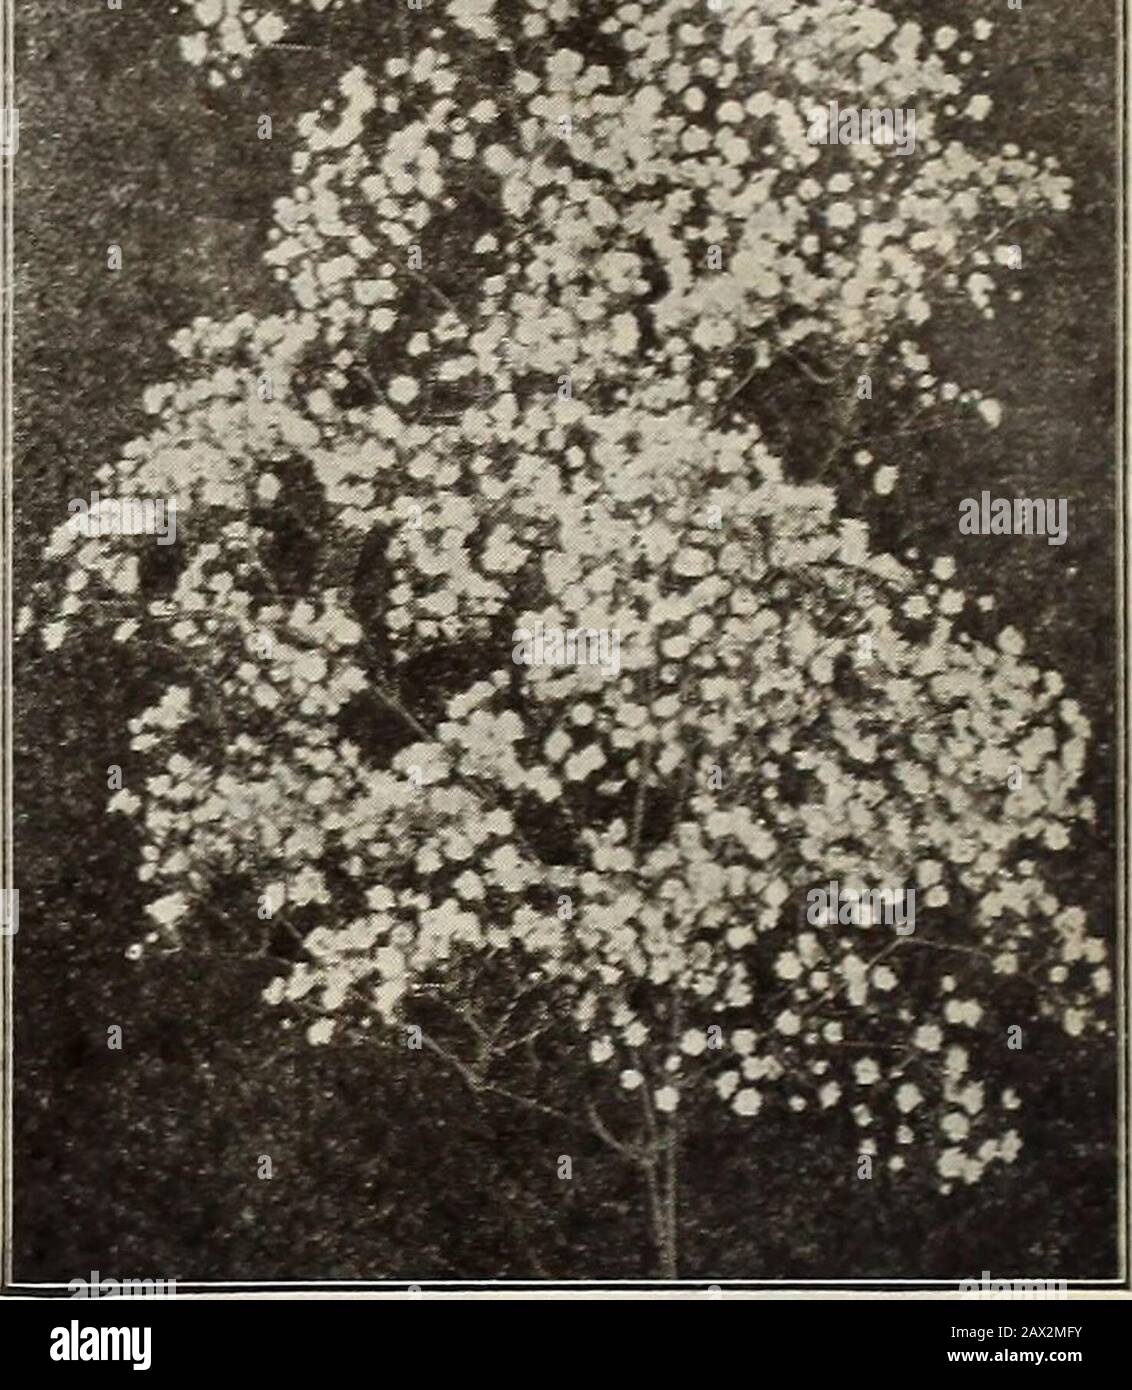 Gregory's honest seeds, 1919 . mproved Double Hollyhock No. Gypsophila ^Babys Breath) Pkt. 1728 Variegatis. Beautifully blotched with silvery white, yellowish green and dark green. $0.10 IMPATIENS. Sultans Balsam (P)Charming plants for the house and table decoration, producingtheir waxy-looking flowers profusely and almost continuously-. 1730 Sultani. Bright rose colored * 10 1732 Holstii. Handsome -variety, of vigorous growth. Flowers measureabout W2 in. across, brilliant vermilion in color. In a half shadysituation the plants grow luxuriantlv out of doors and form showy-flower beds 10 1POMCE Stock Photo